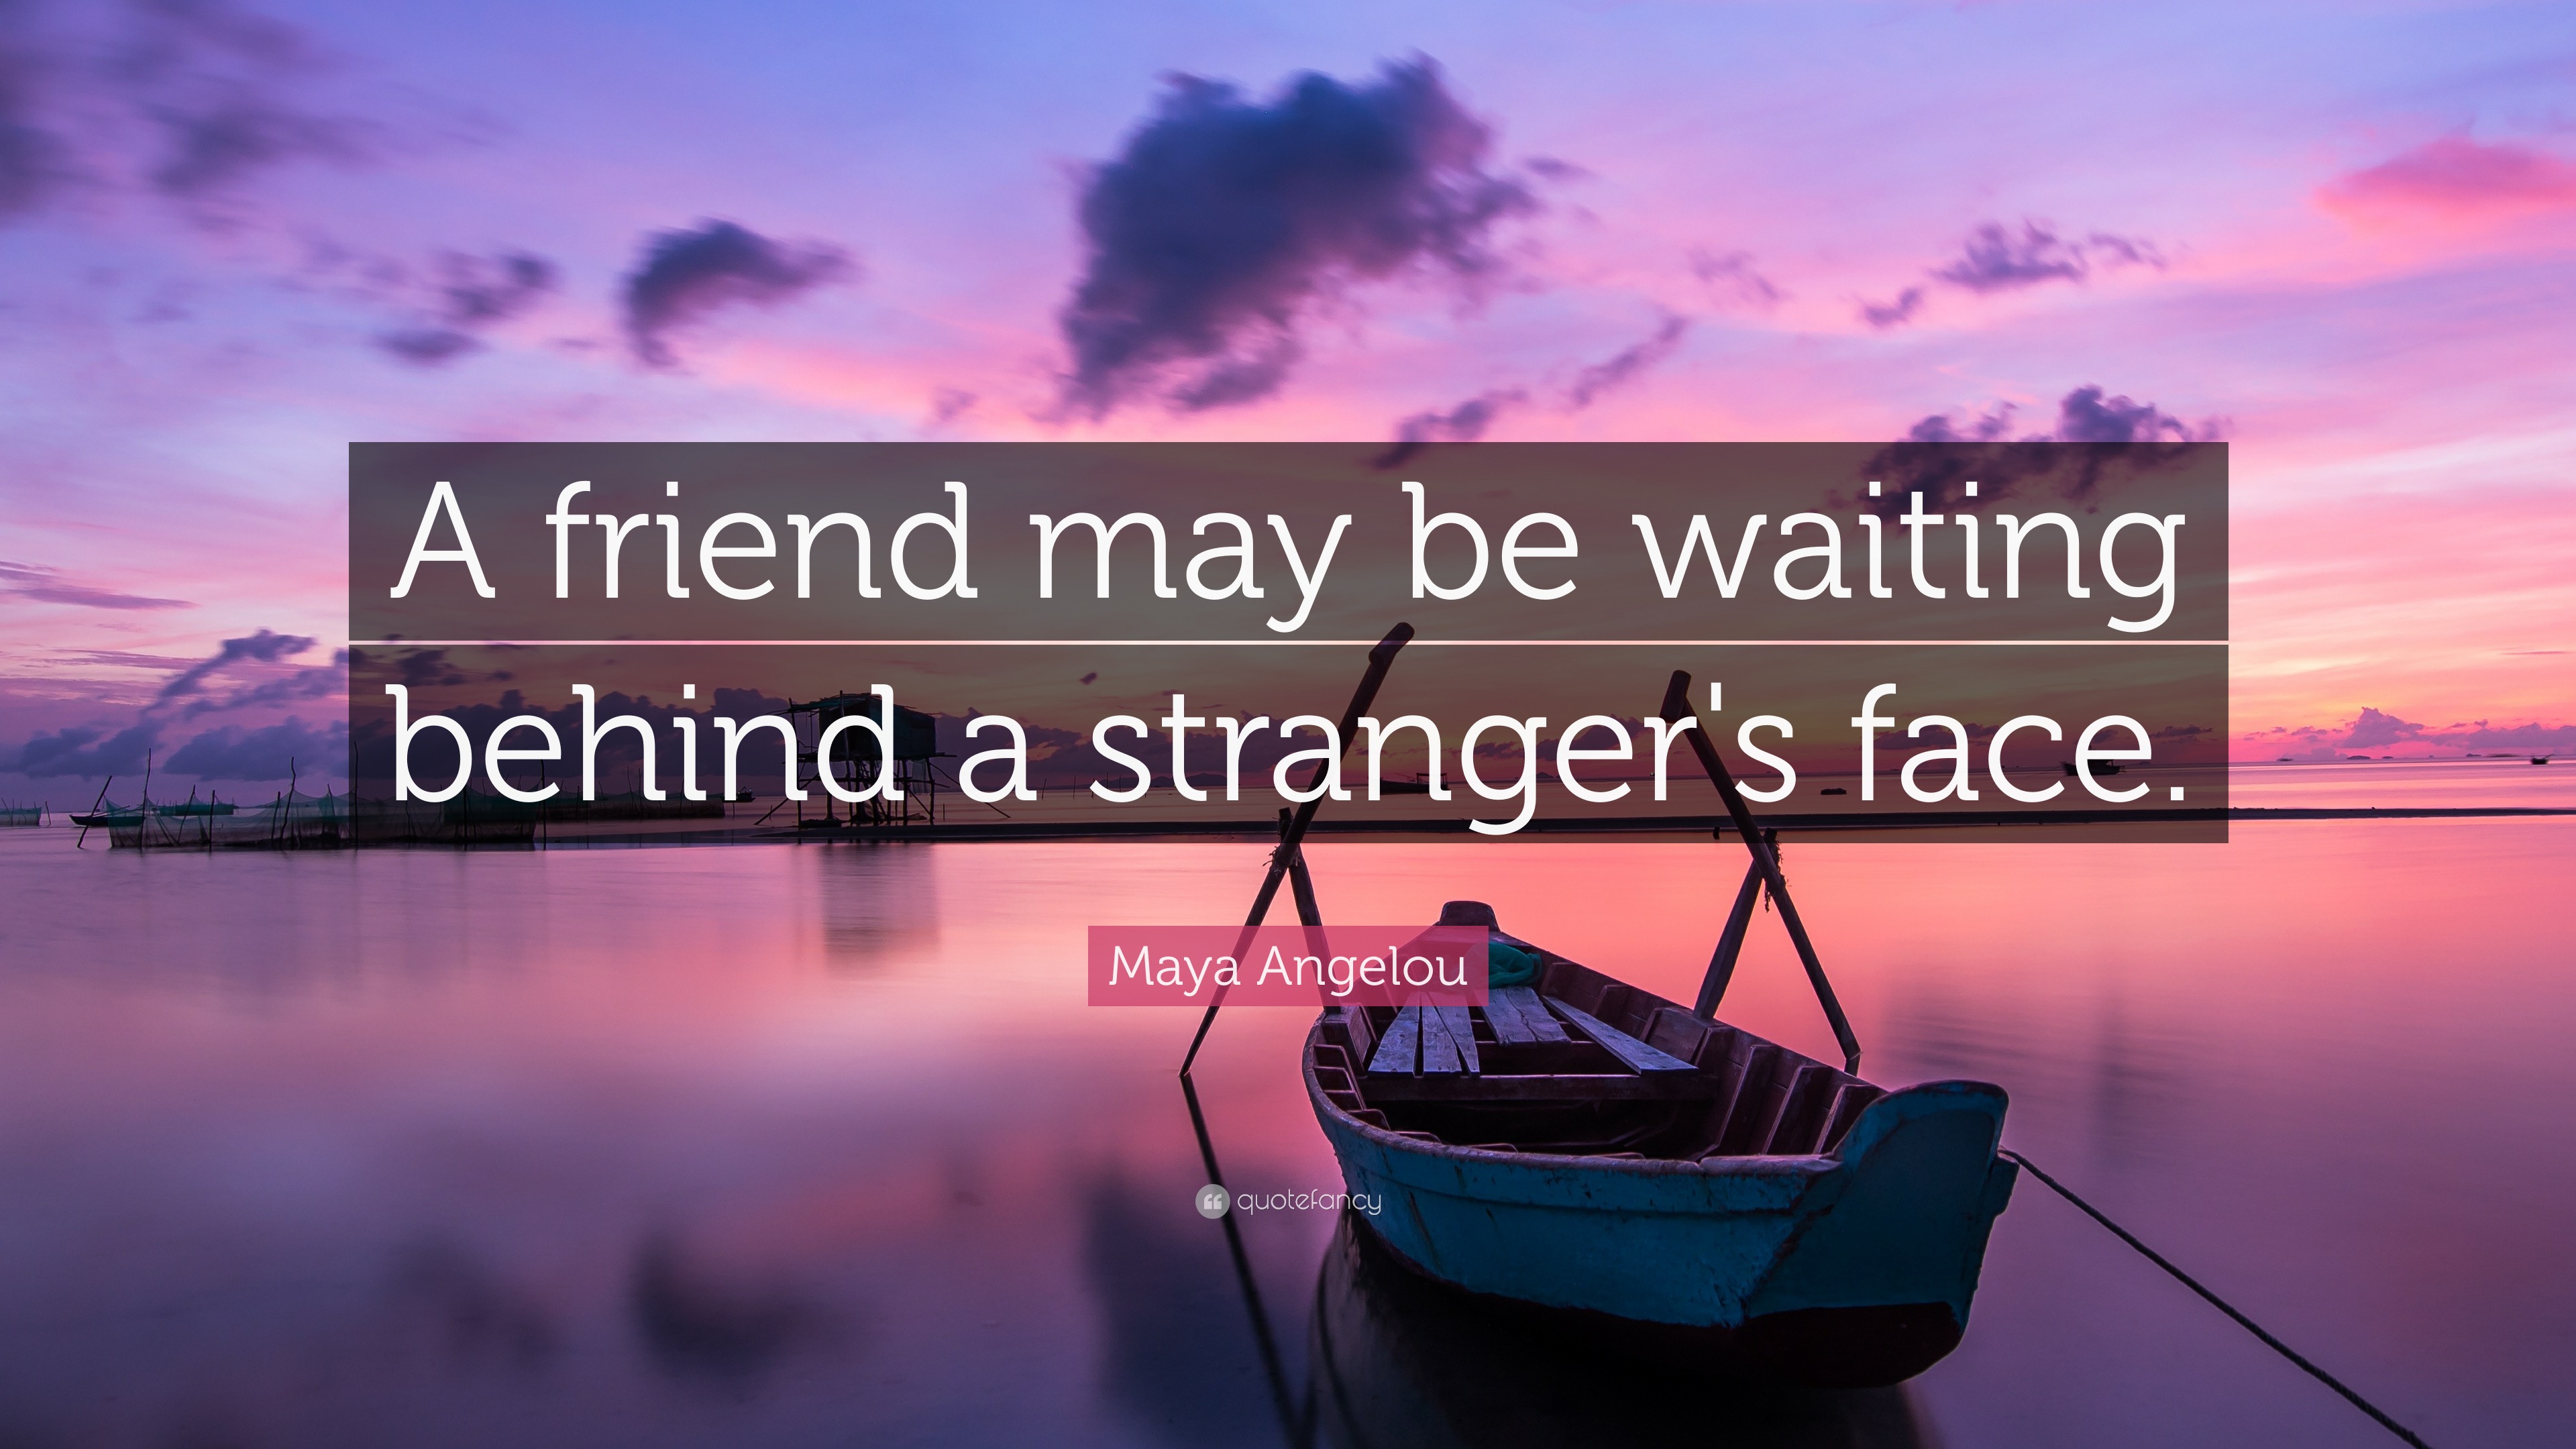 Maya Angelou Quote: "A friend may be waiting behind a stranger's face." (14 wallpapers) - Quotefancy